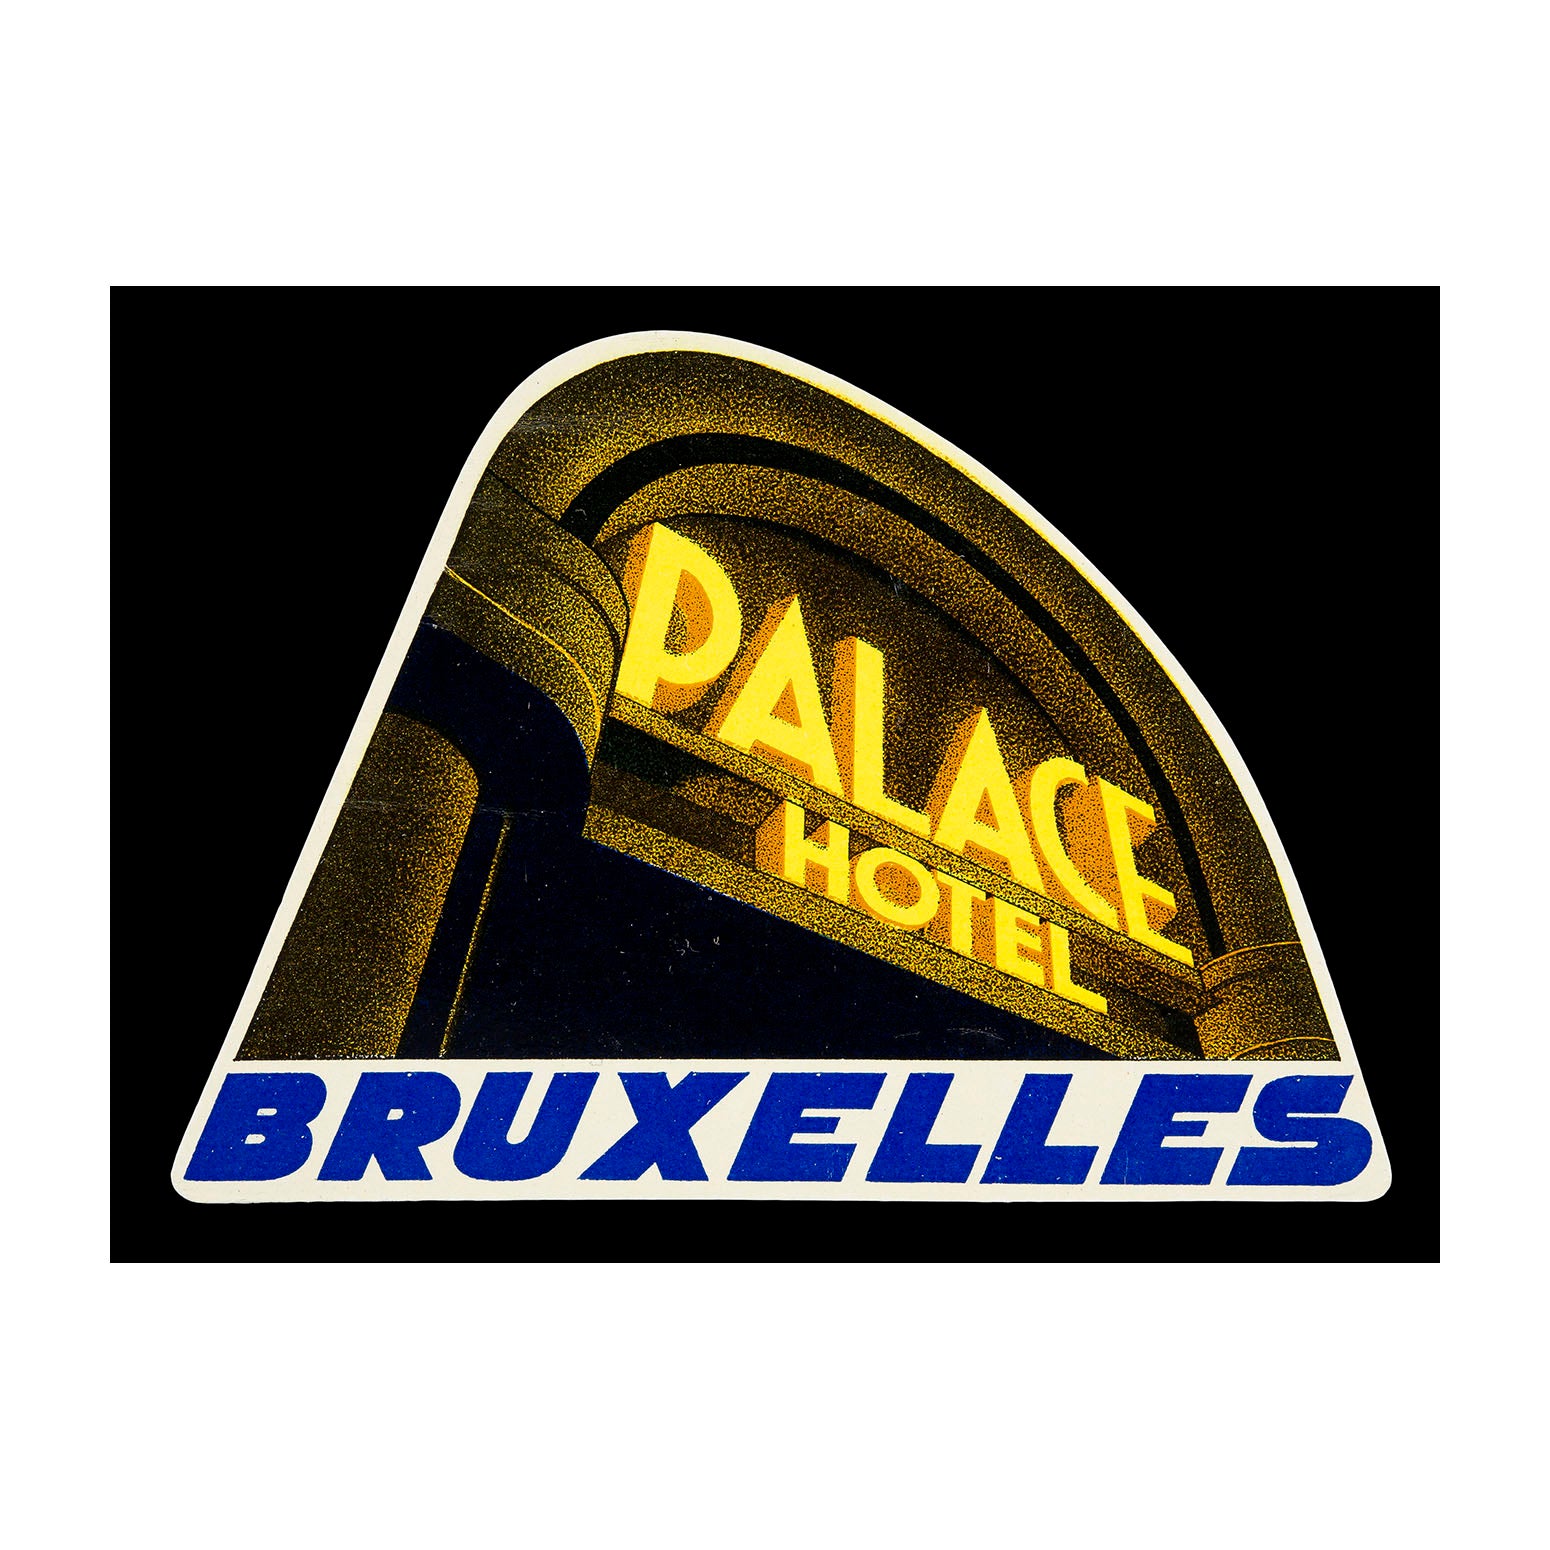 Palace Hotel, Bruxelles (luggage label)